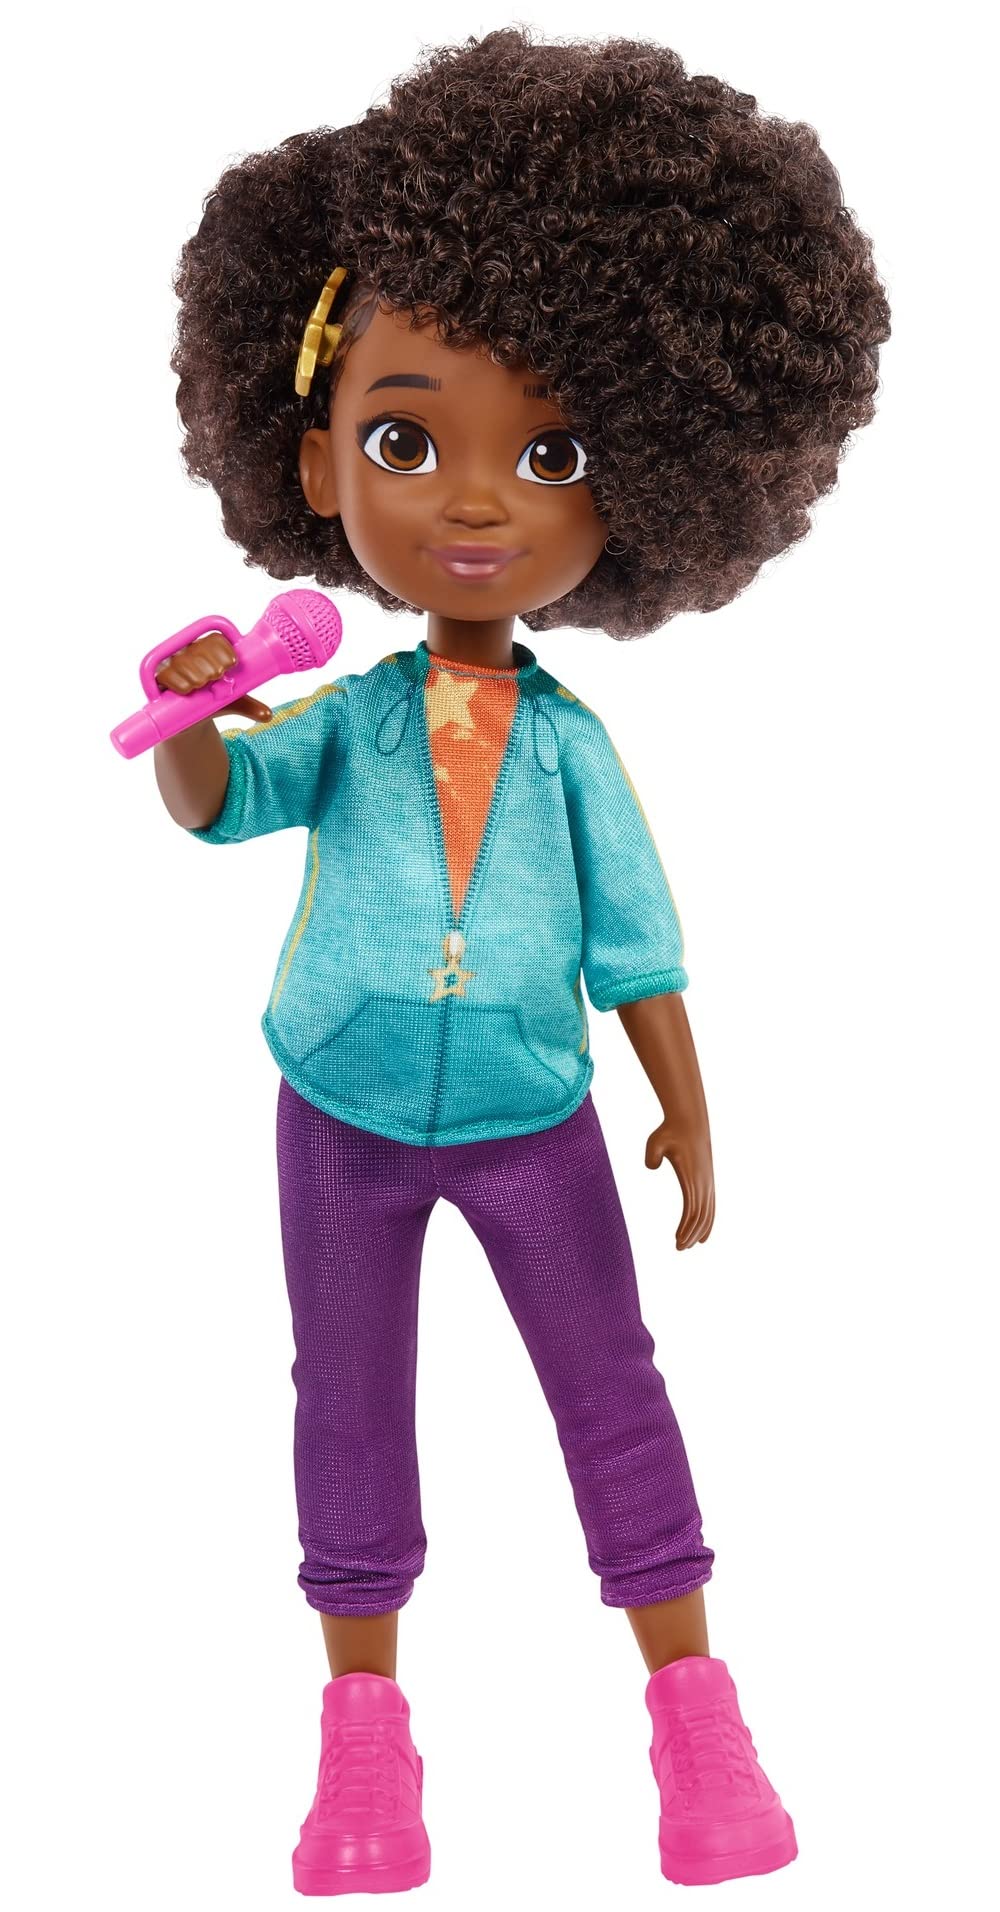 Karma's World Karma Grant Doll with Microphone Accessory, Brown Hair & Brown Eyes - $3.99 - Amazon